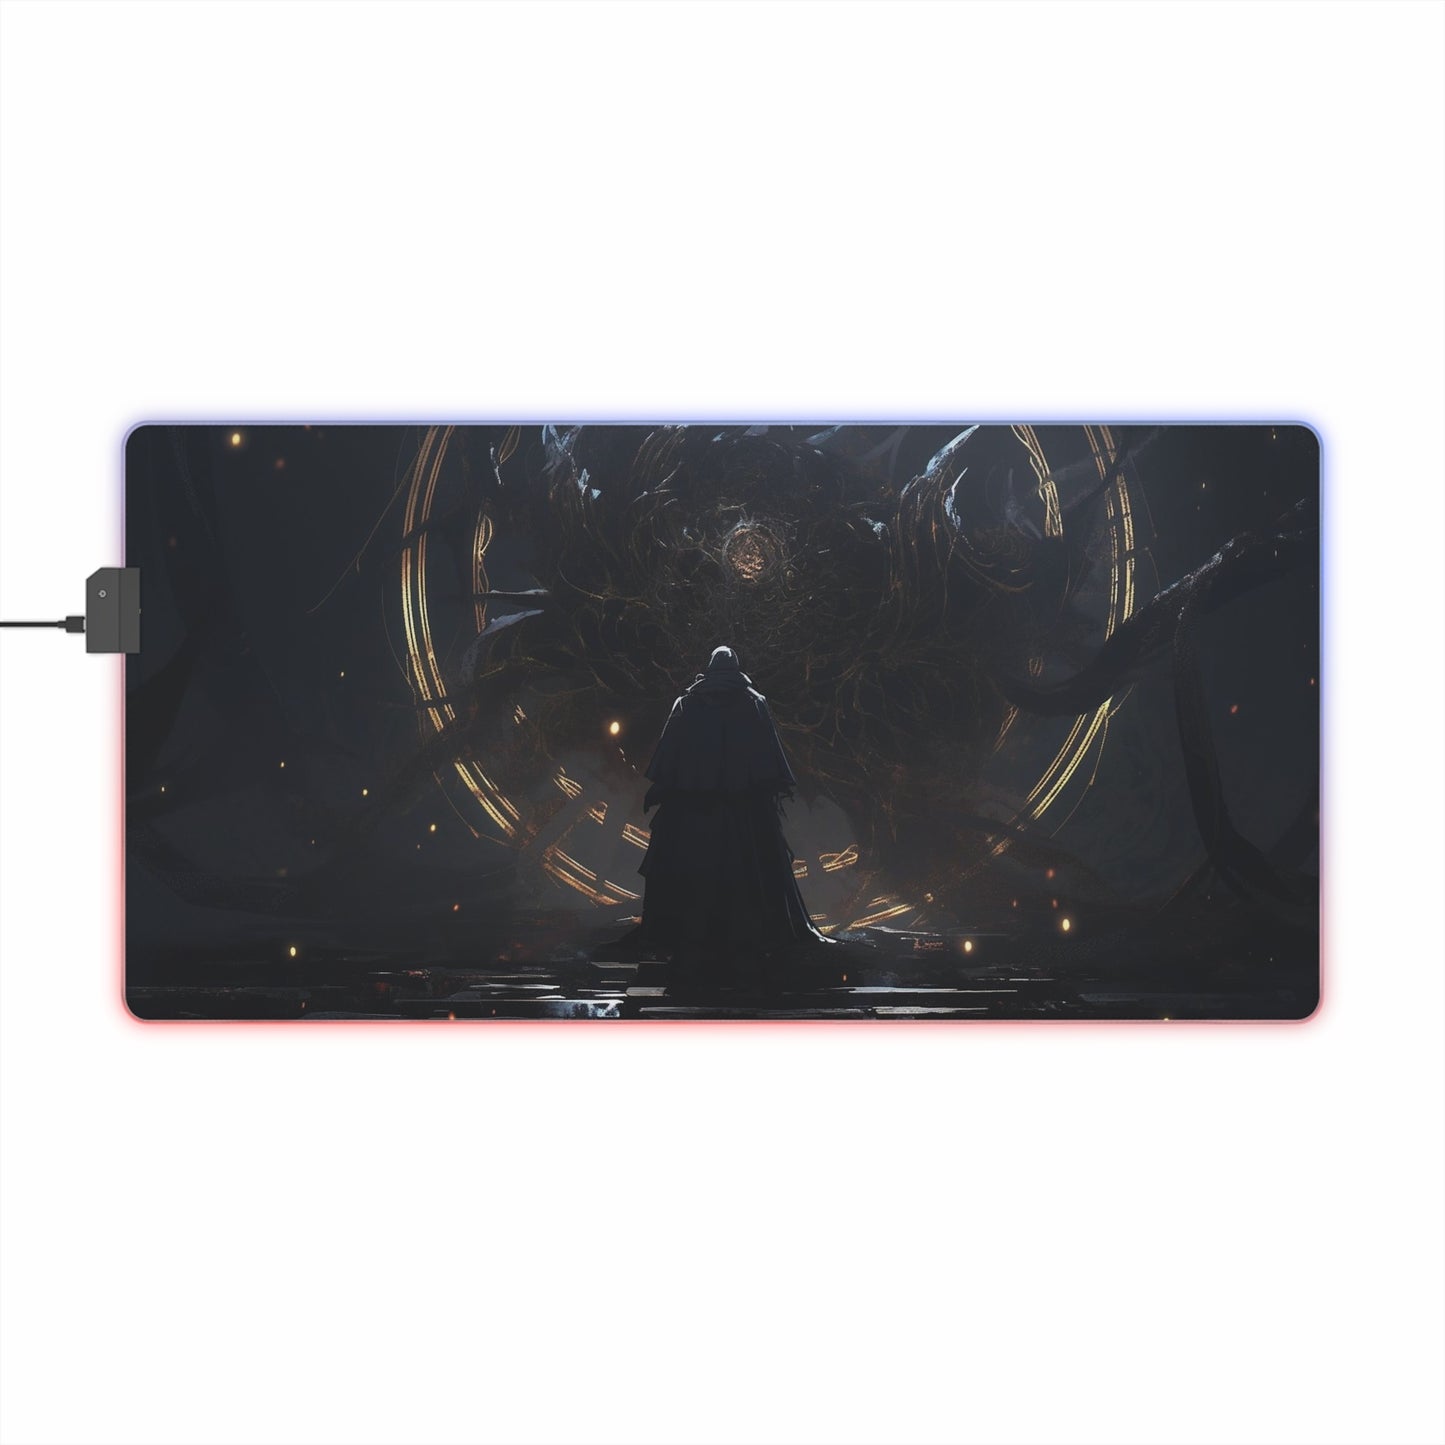 CLMP-7 LED Gaming Mouse Pad